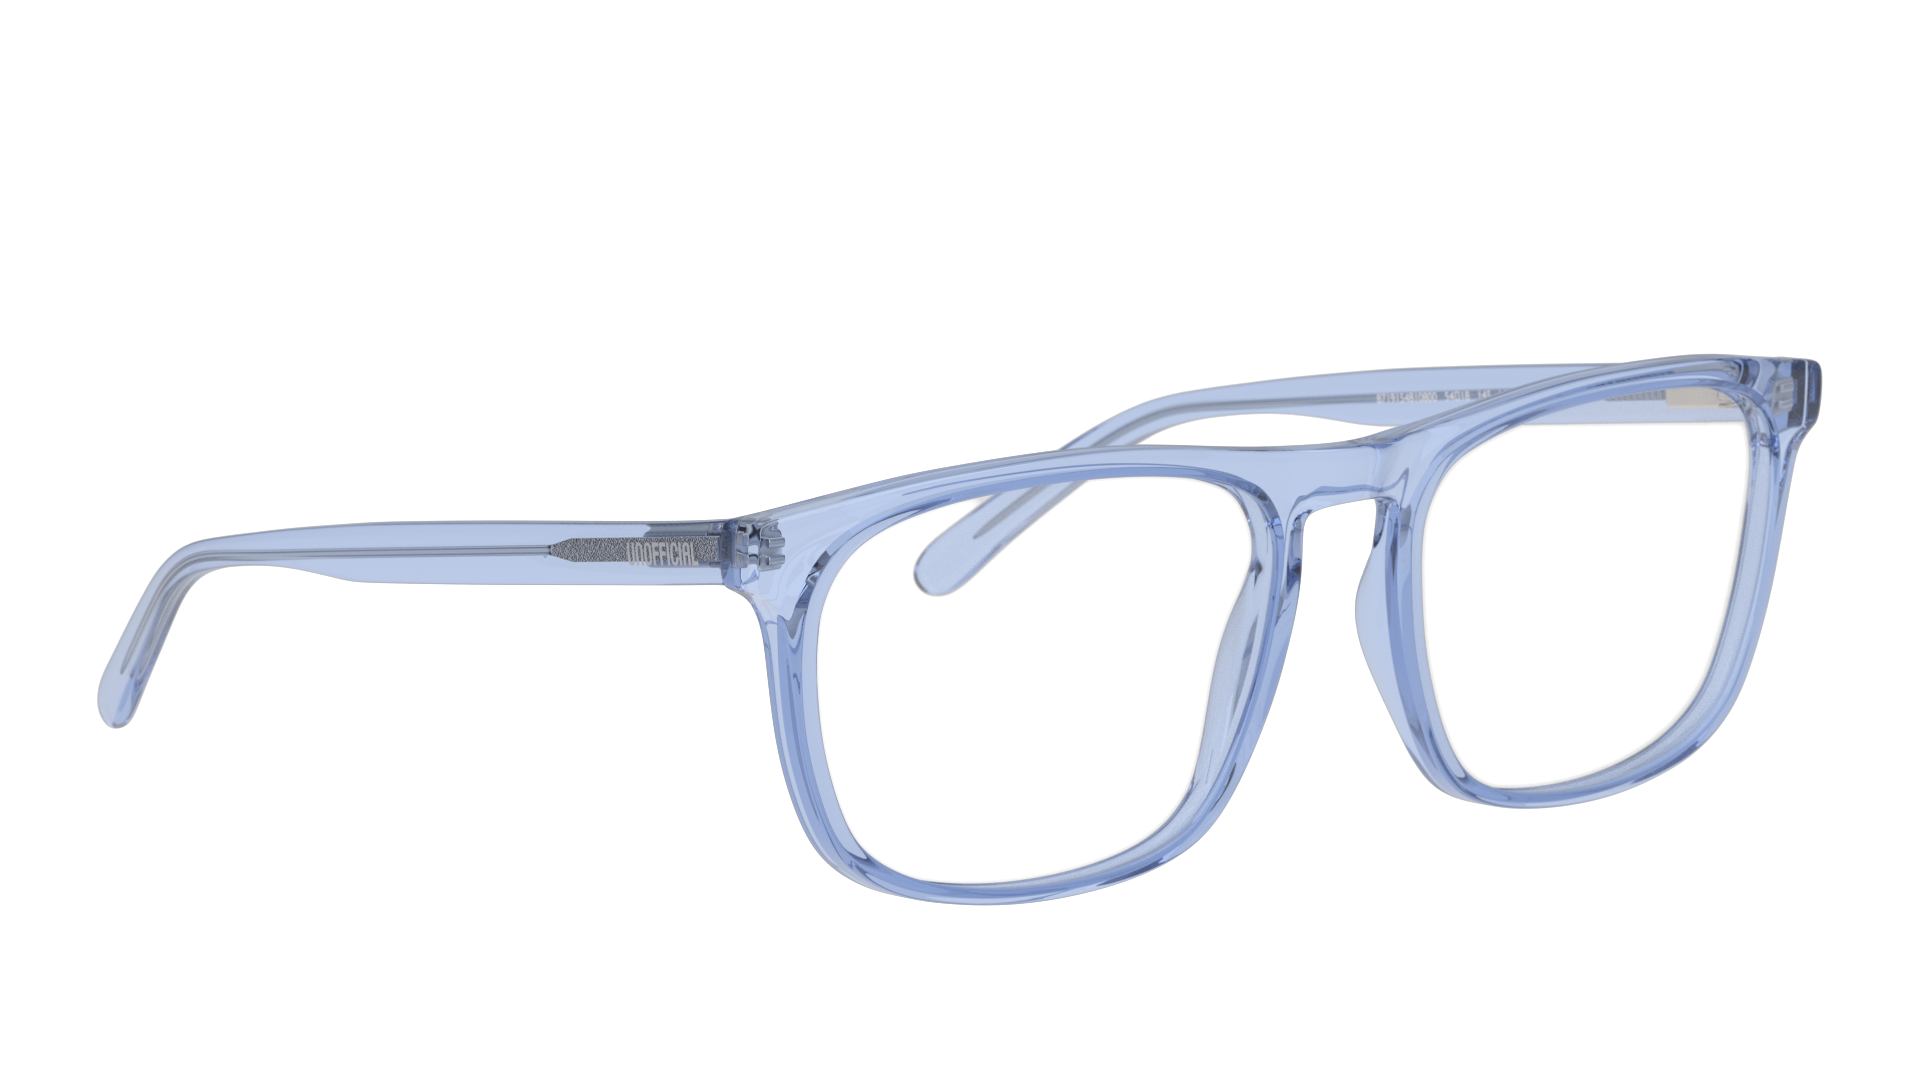 Angle_Right01 Unofficial UNOM0227 (LL00) Glasses Transparent / Blue